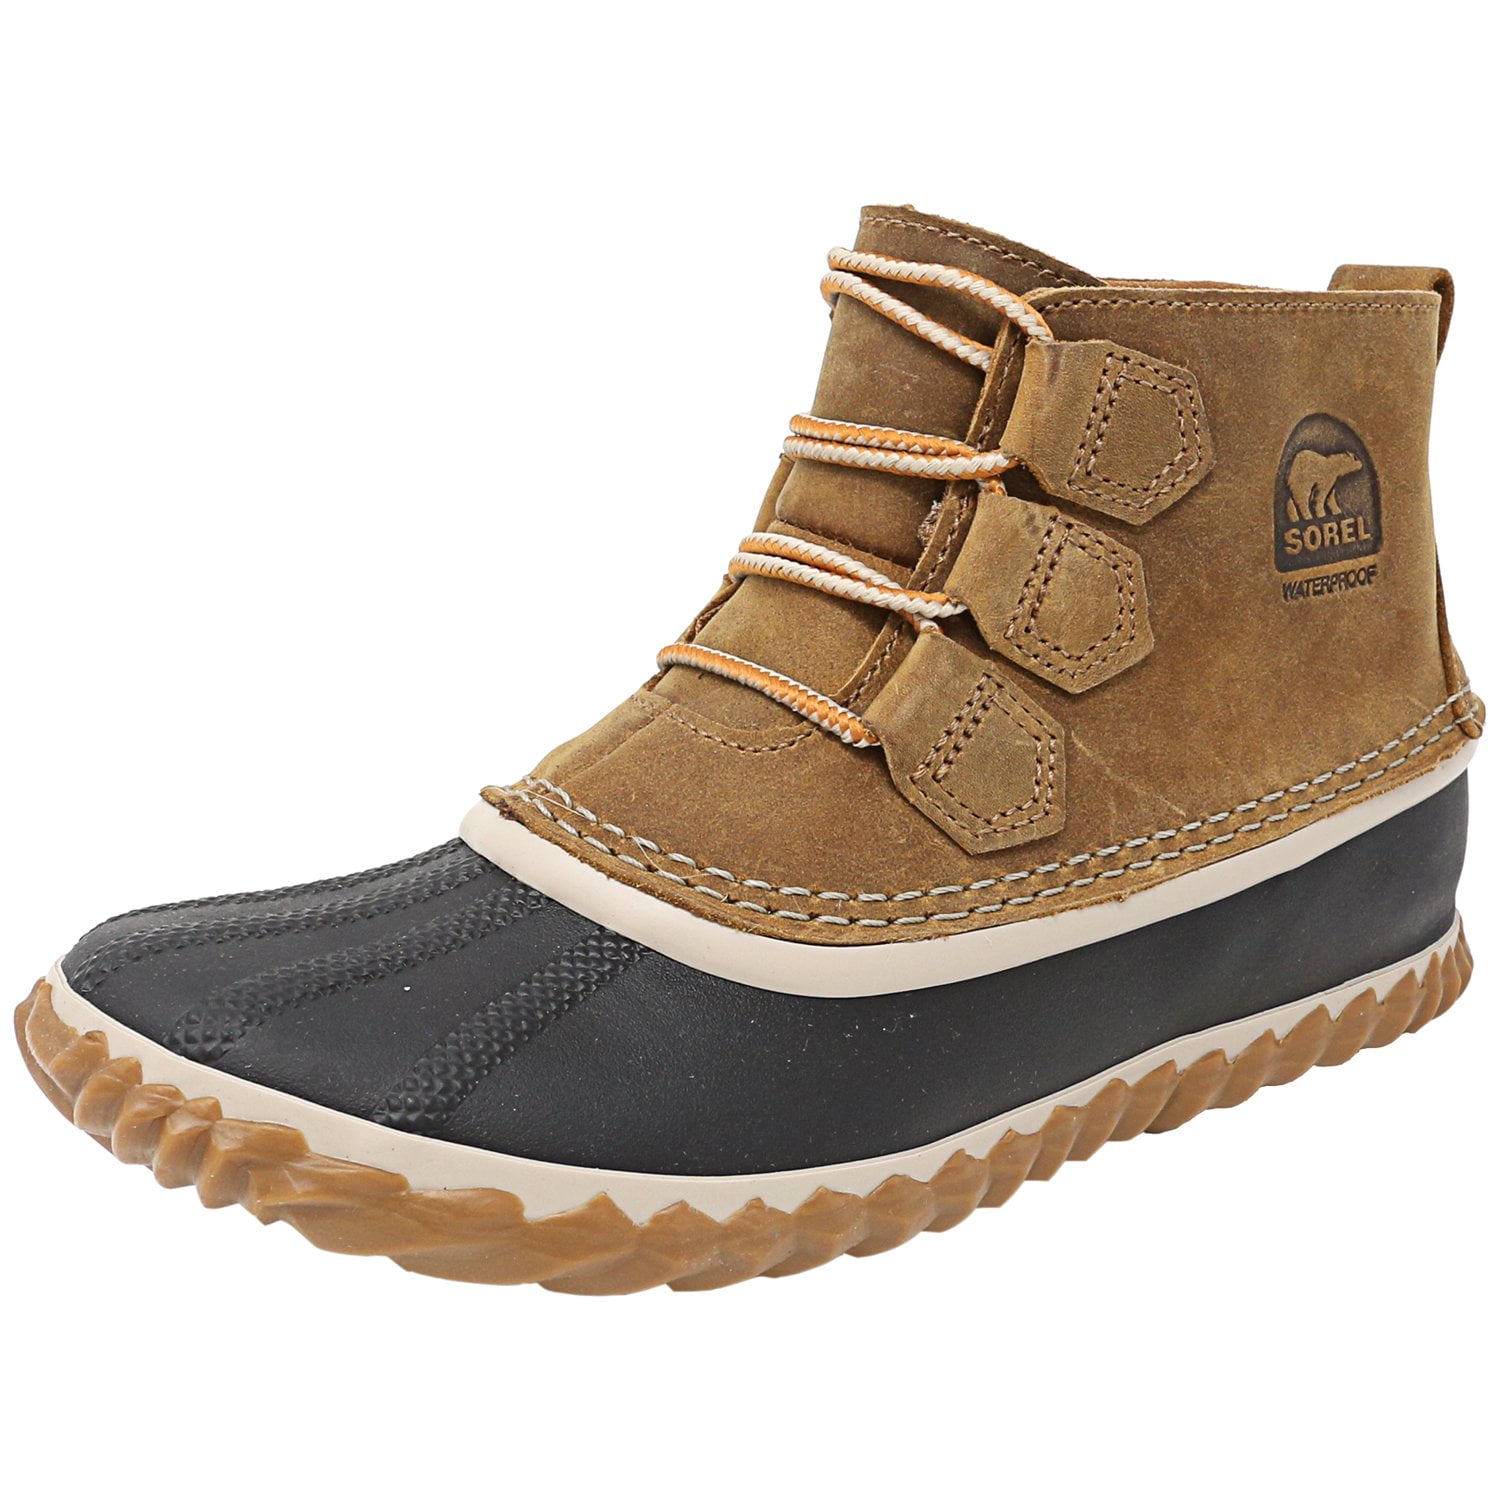 women's out n about sorel boot